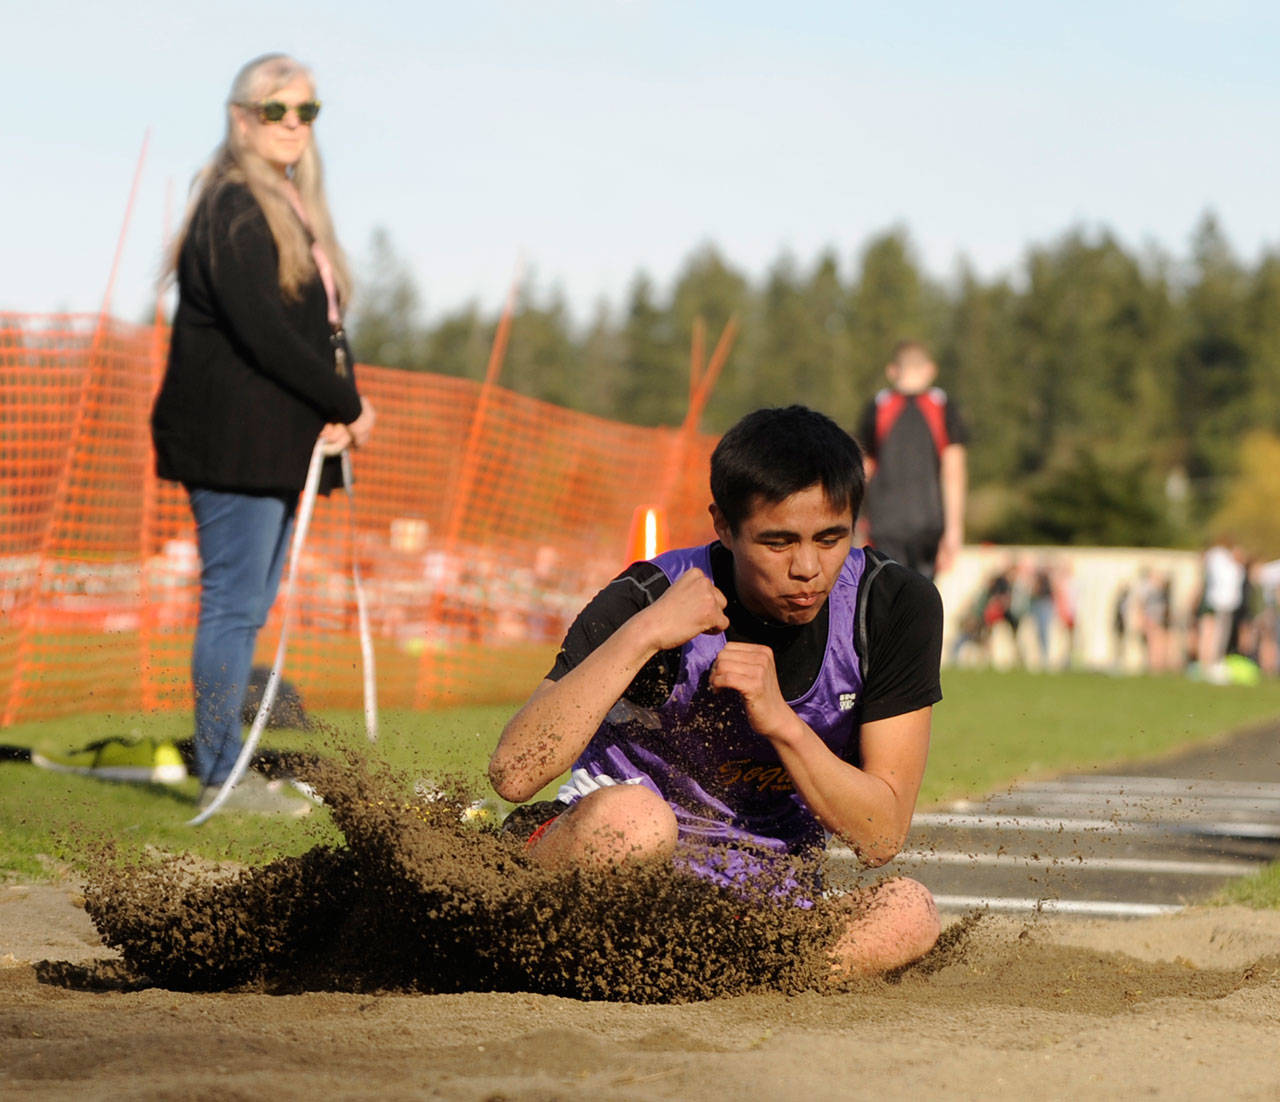 Sequim High senior Rigo Langston stretches for a solid mark in the long jump at last week’s “Flying A” meet in Port Angeles. Langston had a personal best 16-6.5 effort in the event, good for 12th overall. Sequim Gazette photo by Michael Dashiell